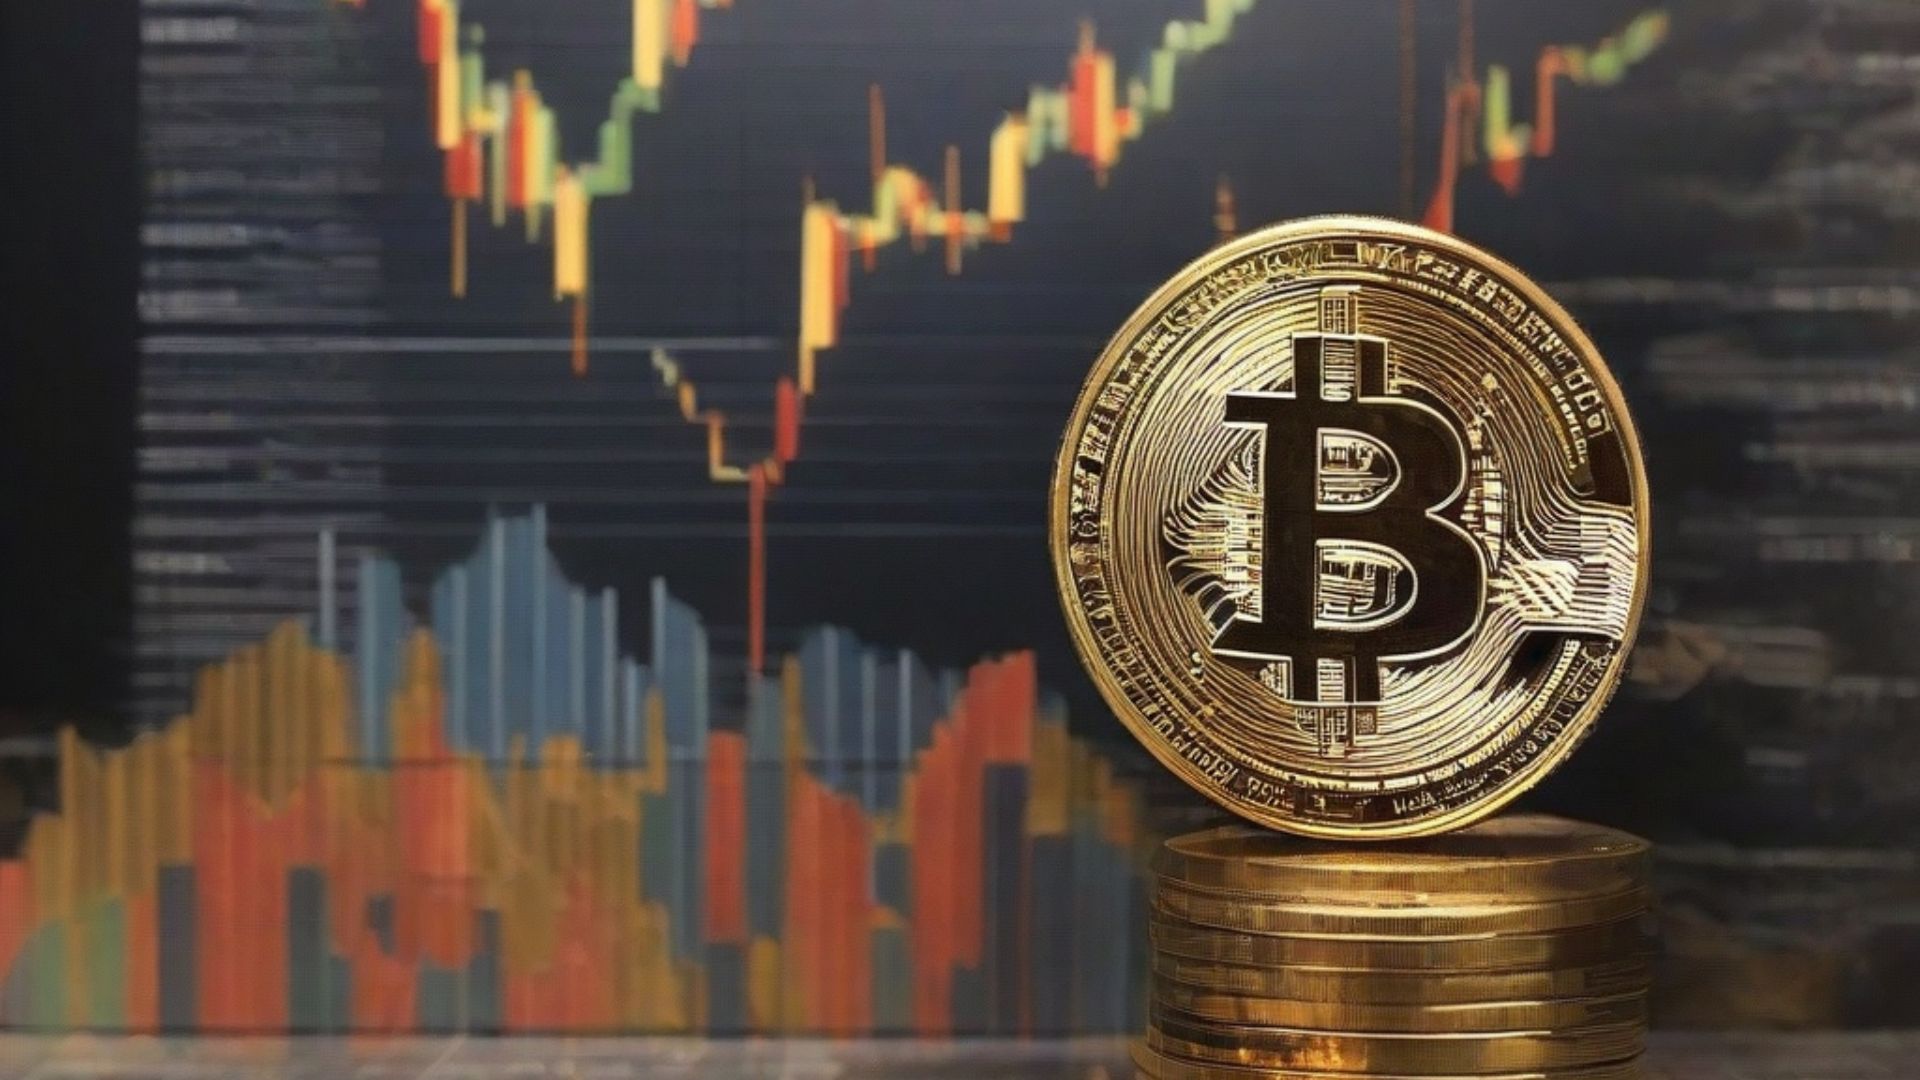 Bitcoin Price Prediction: BTC Defies ECB’s ”Last Gasp” Prediction As It Flirts With $45K, But Investors Flock To This BTC Altcoin To Play The Next Crypto Bull Run